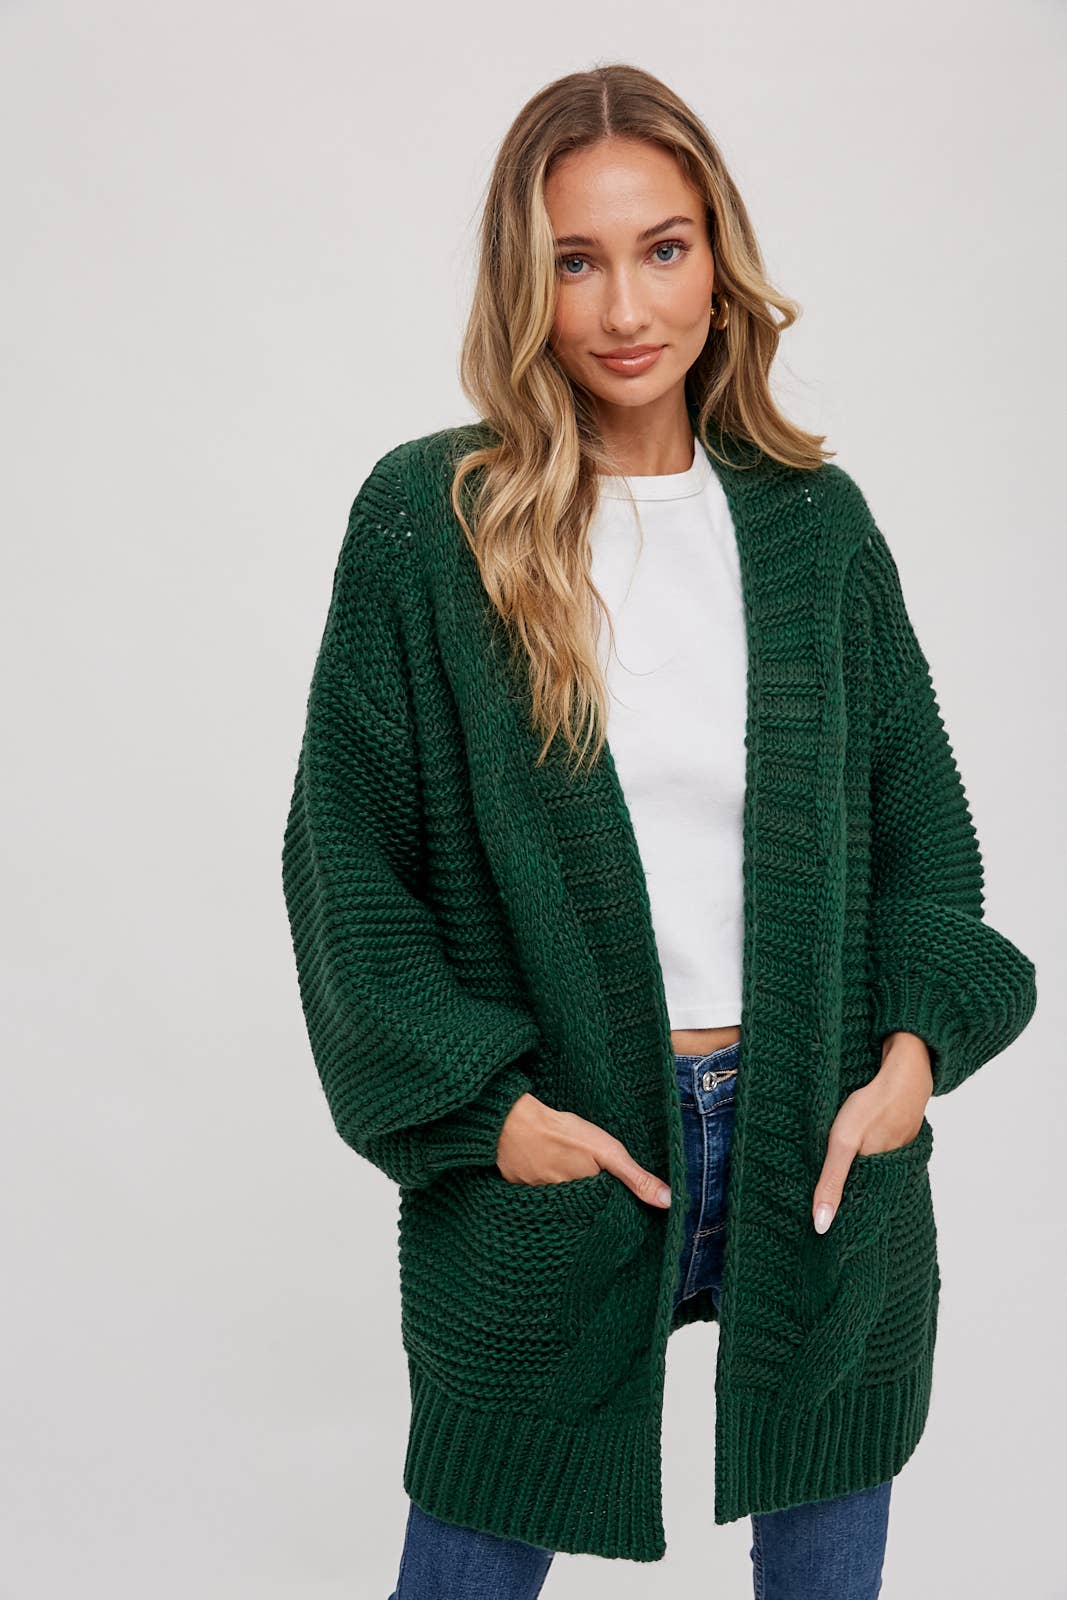 CHUNKY CABLE SWEATER LANTERN SLEEVE CARDIGAN: FOREST / S/M